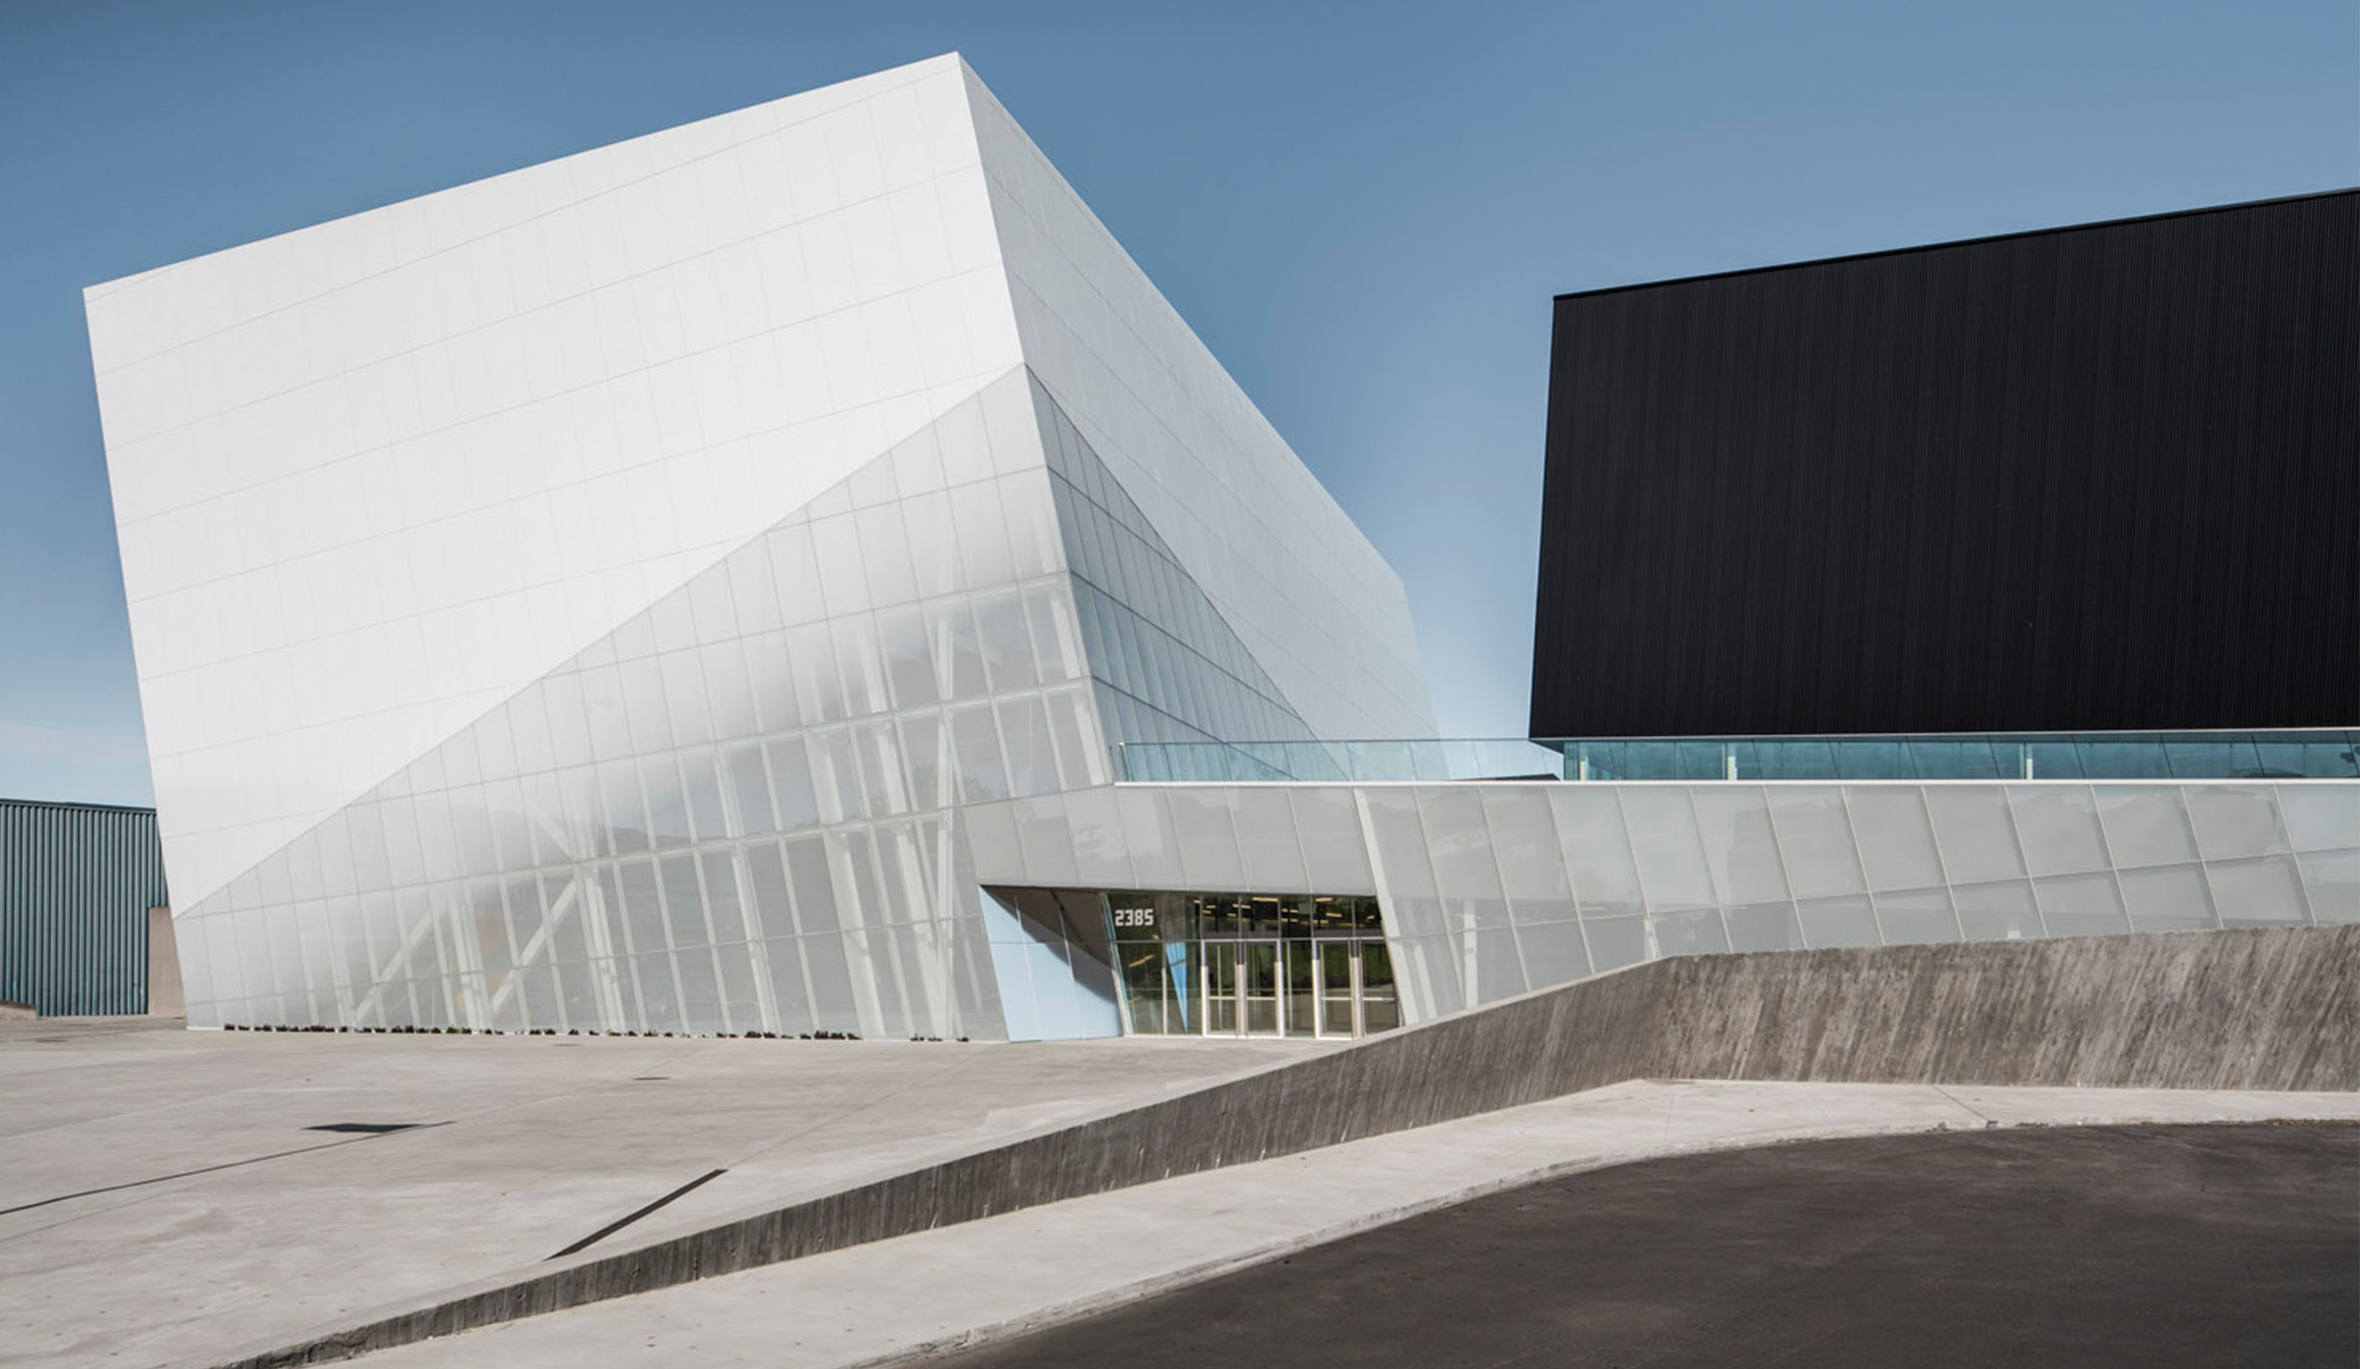 Strong angular shapes of the black and white volumes that form the Saint Laurent Sports Complex.